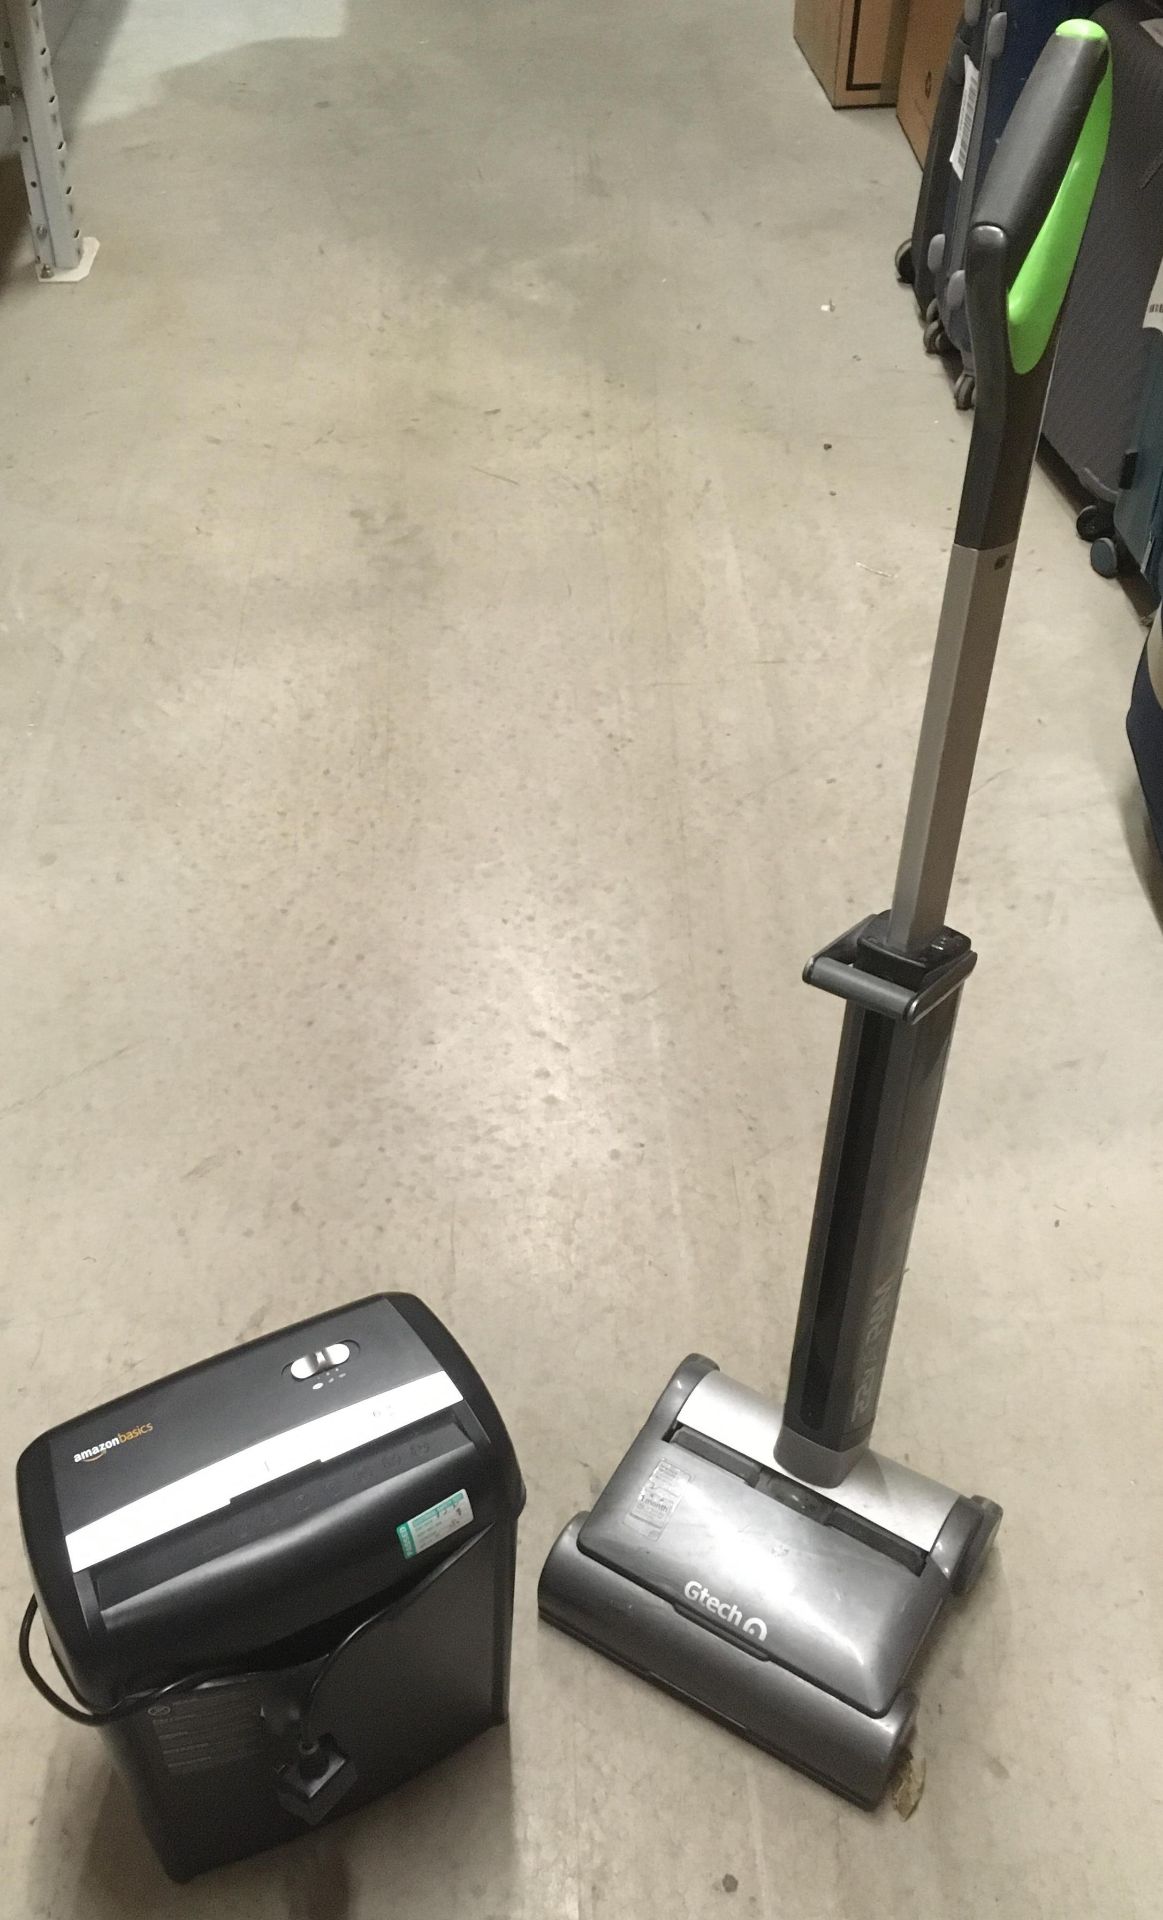 A Gtech 22v Air Ram cordless vacuum cleaner (no charger) and an Amazon Basics shredder (2)